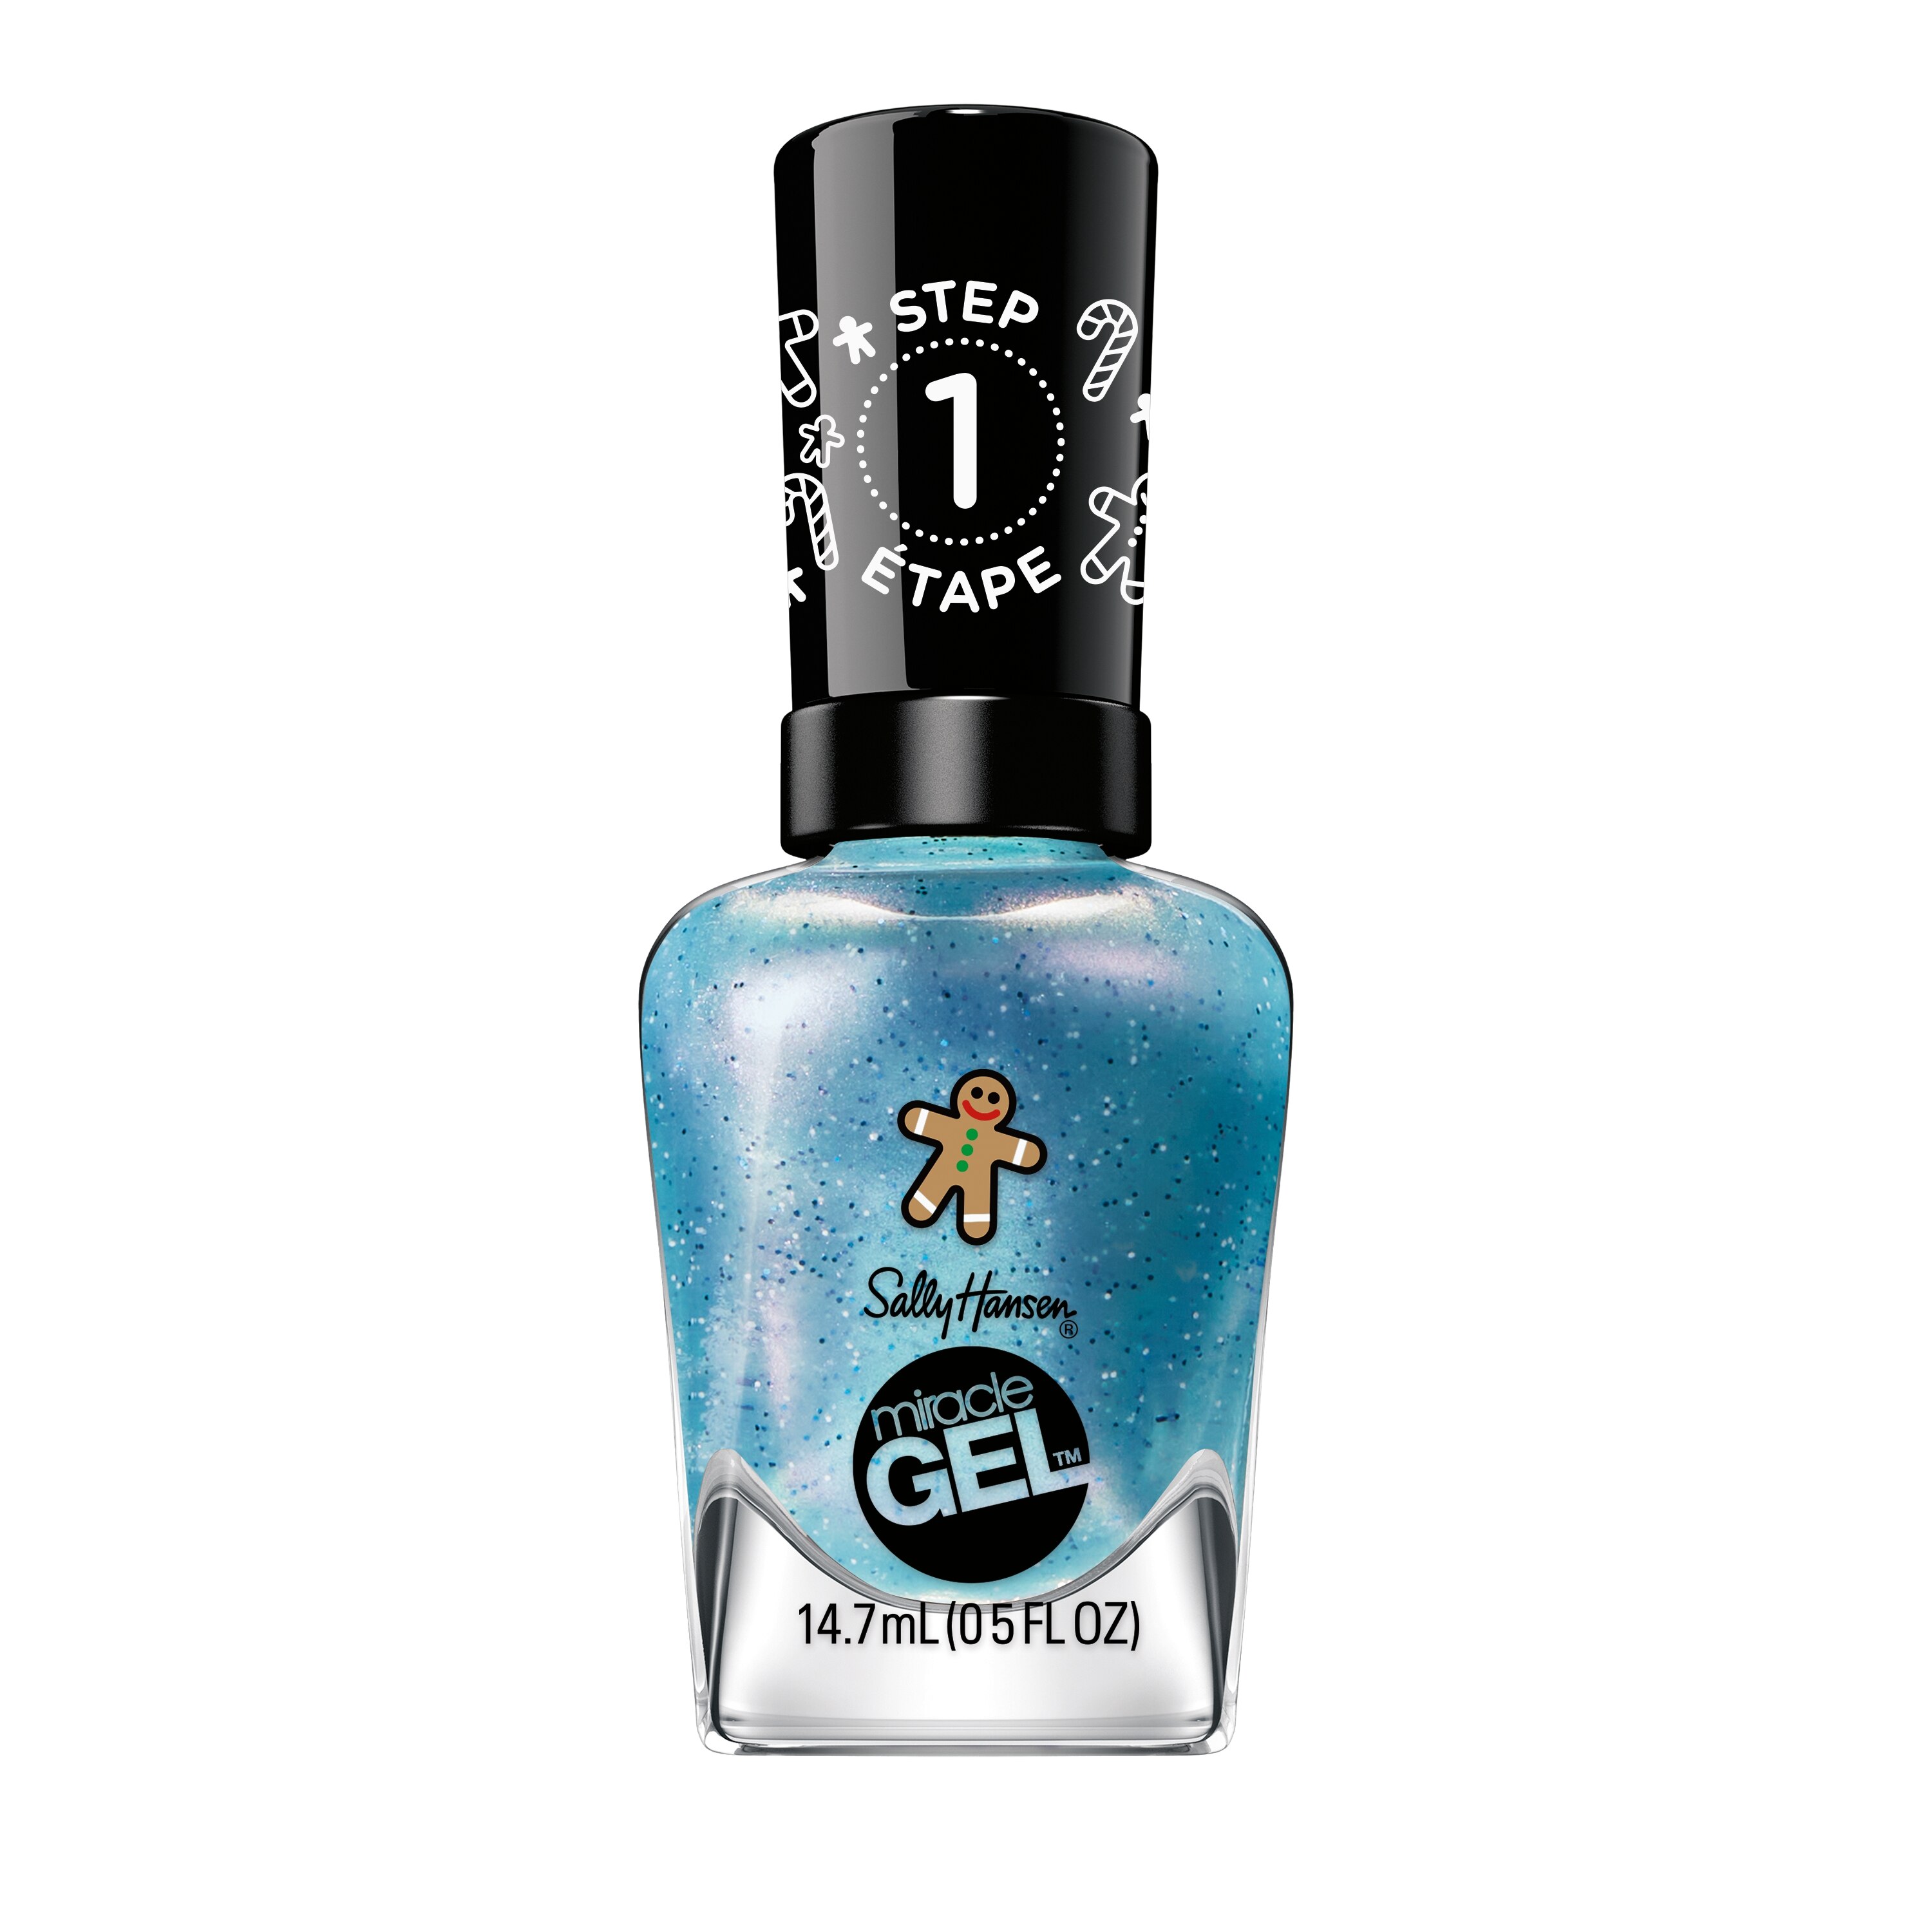 Sally Hansen Miracle Gel, Jack Frosted | CVS